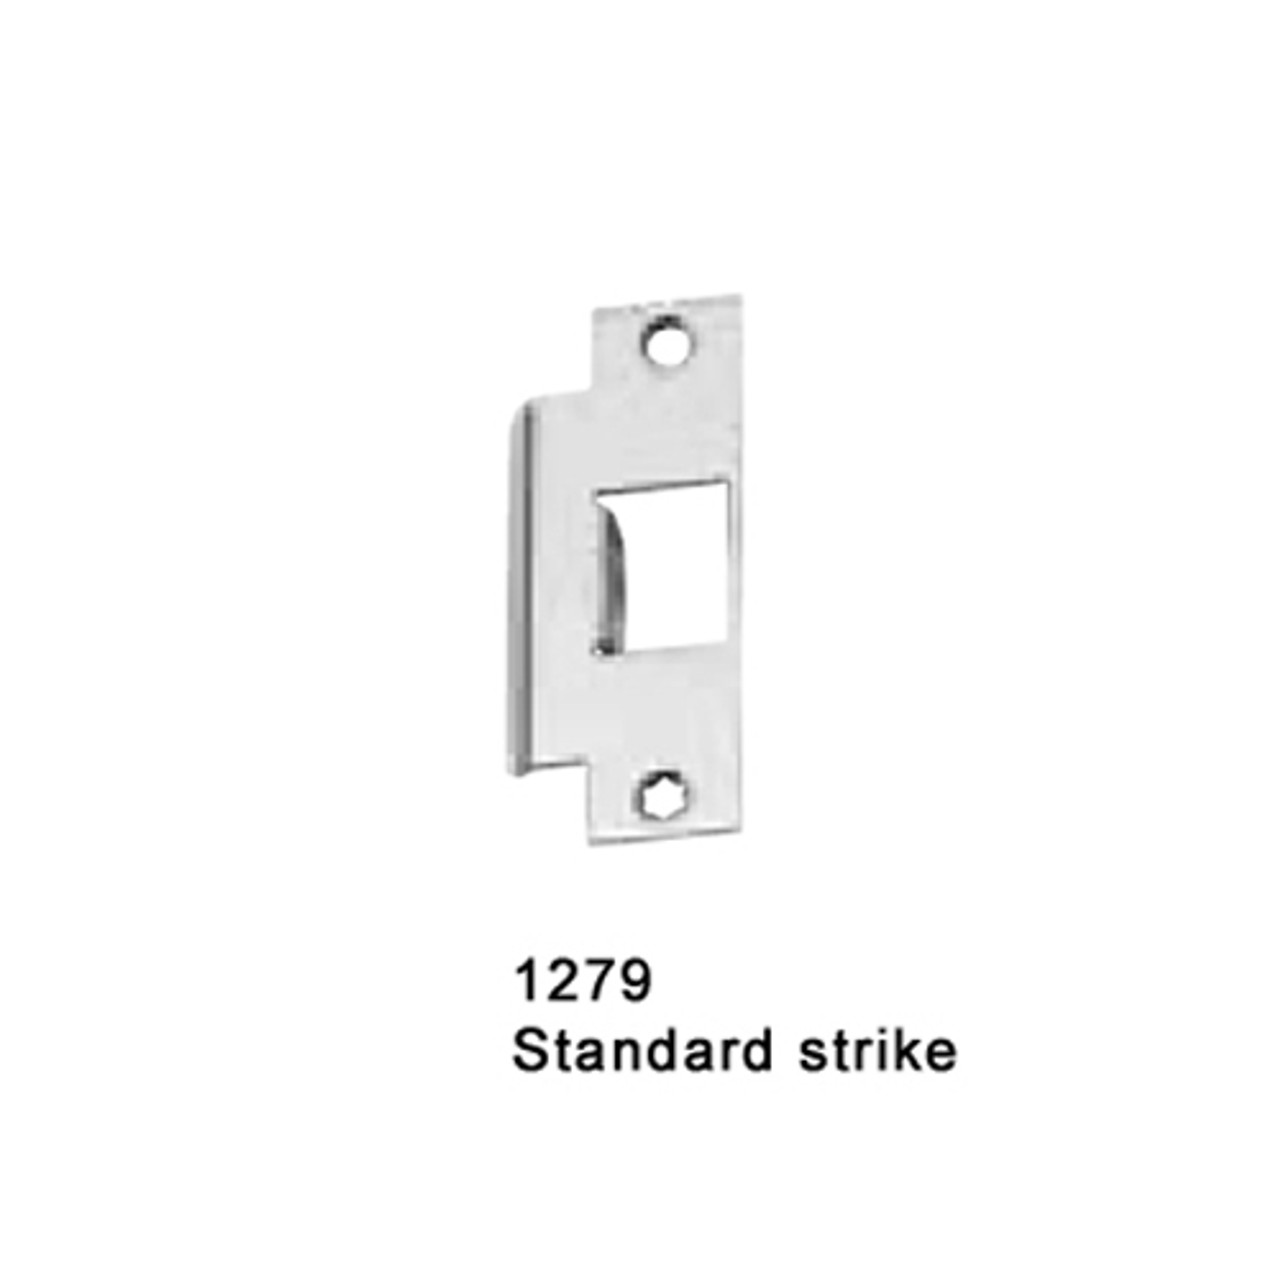 CD25-M-NL-US28-4-LHR Falcon 25 Series Mortise Lock Devices with 512NL Night Latch Trim in Anodized Aluminum